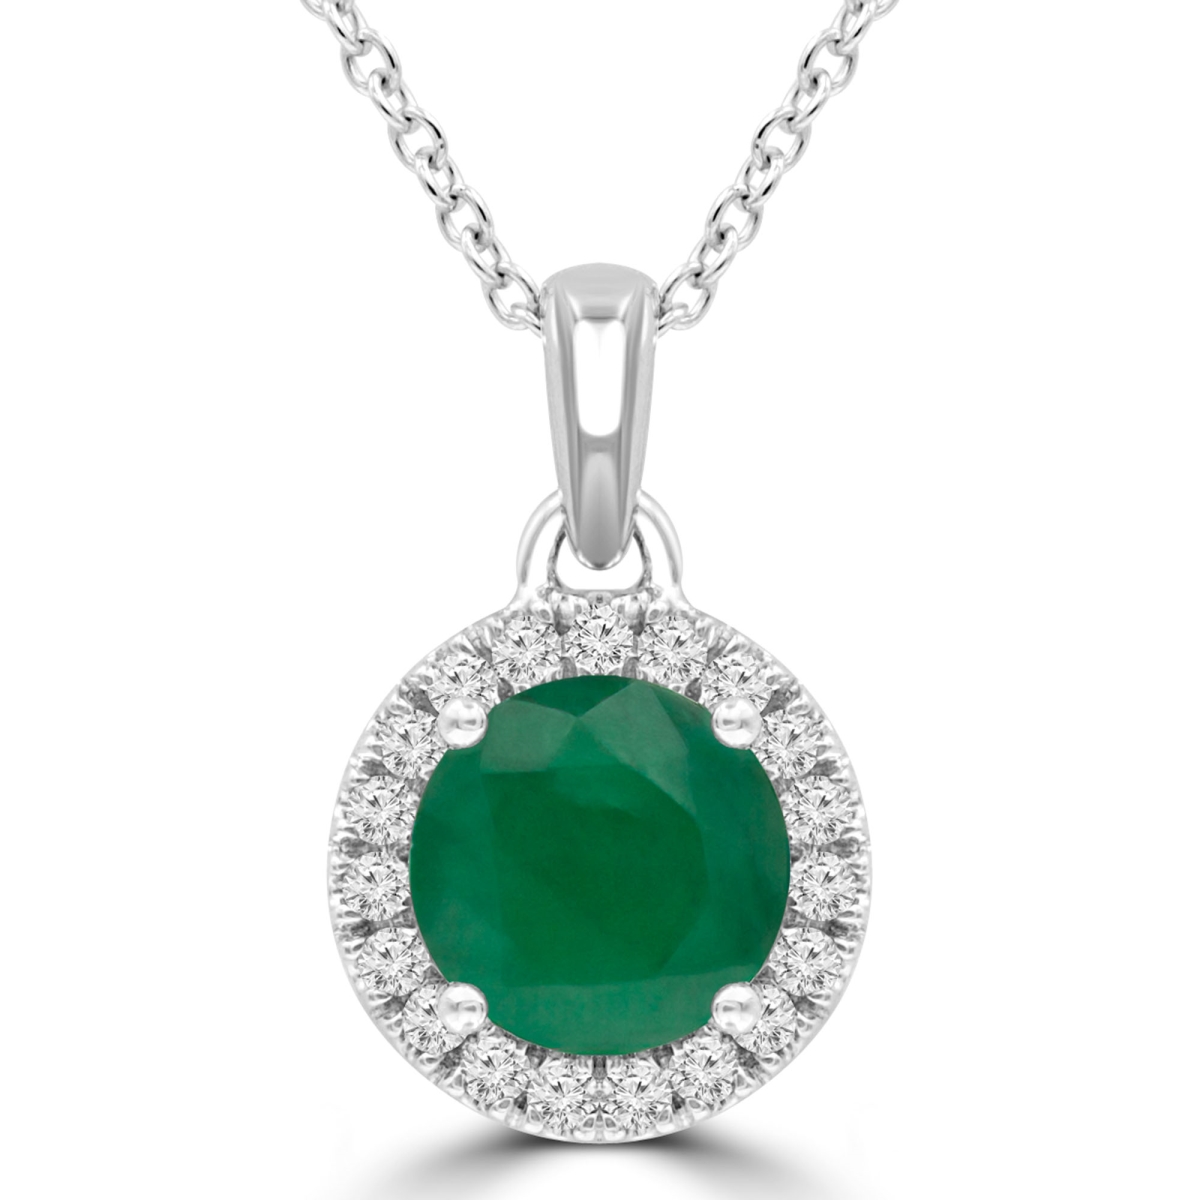 Picture of Majesty Diamonds MDR220195 0.8 CTW Round Green Emerald Halo Pendant Necklace in 14K White Gold